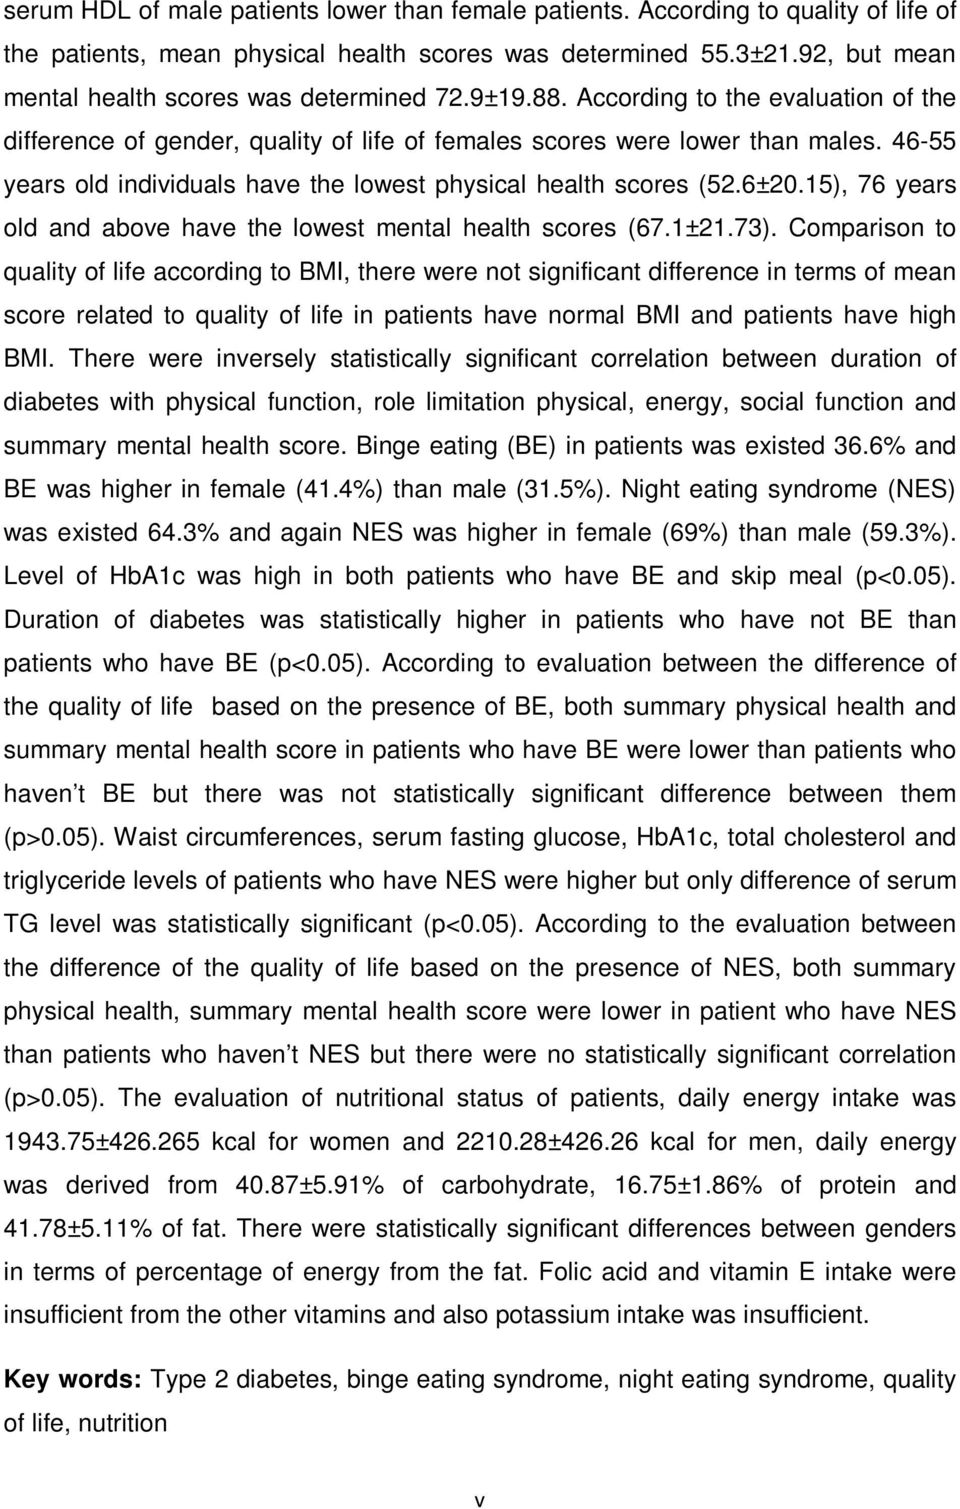 46-55 years old individuals have the lowest physical health scores (52.6±20.15), 76 years old and above have the lowest mental health scores (67.1±21.73).